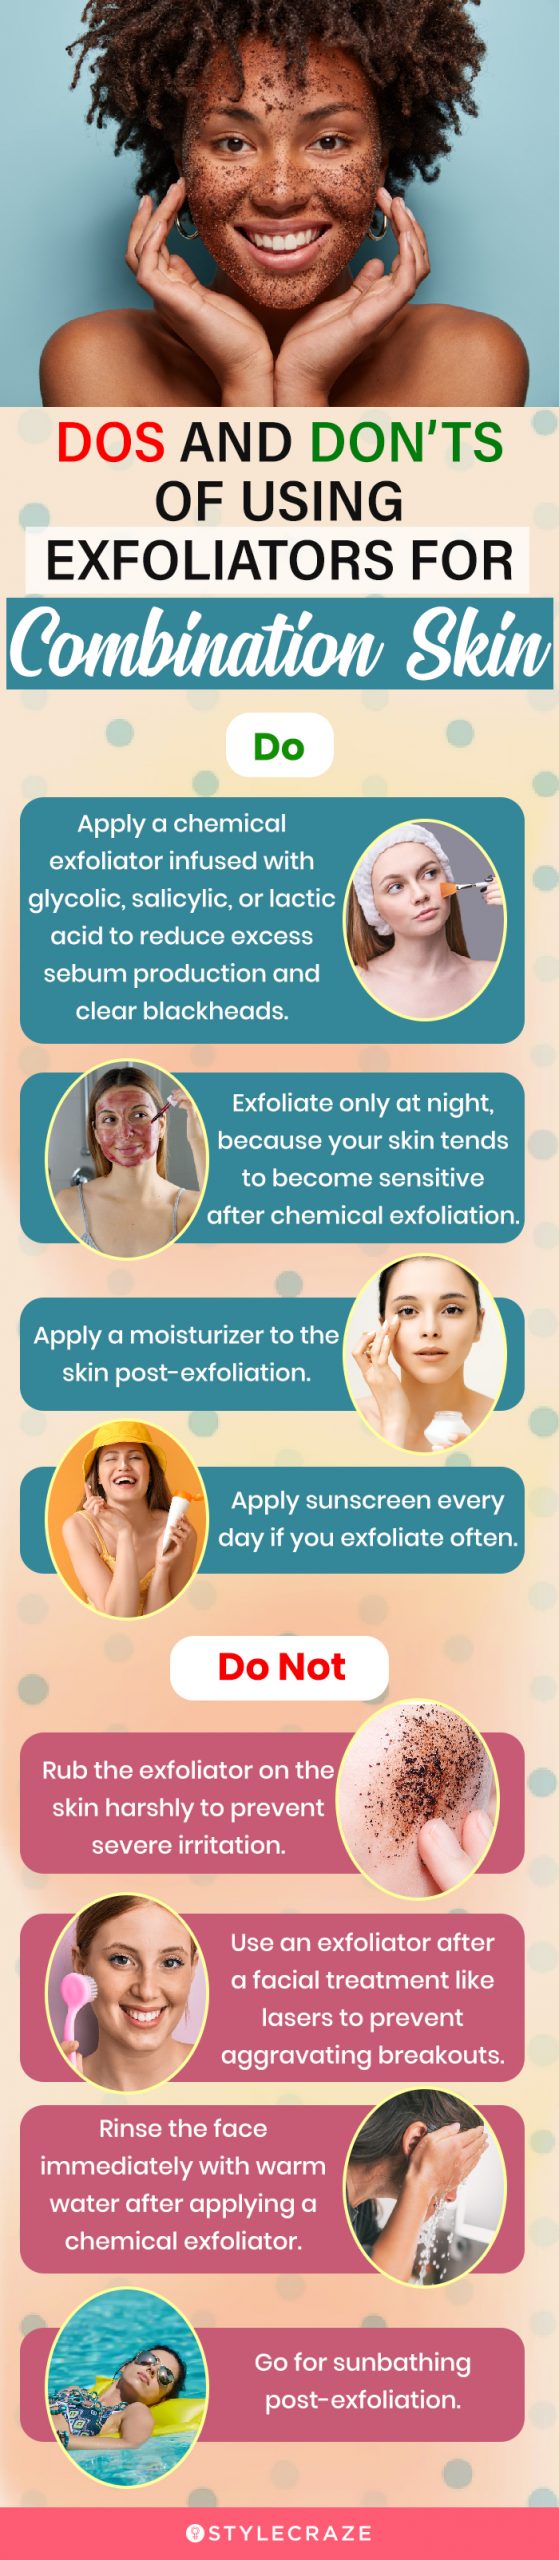 Dos And Don’ts Of Using Exfoliators For Combination Skin (infographic)